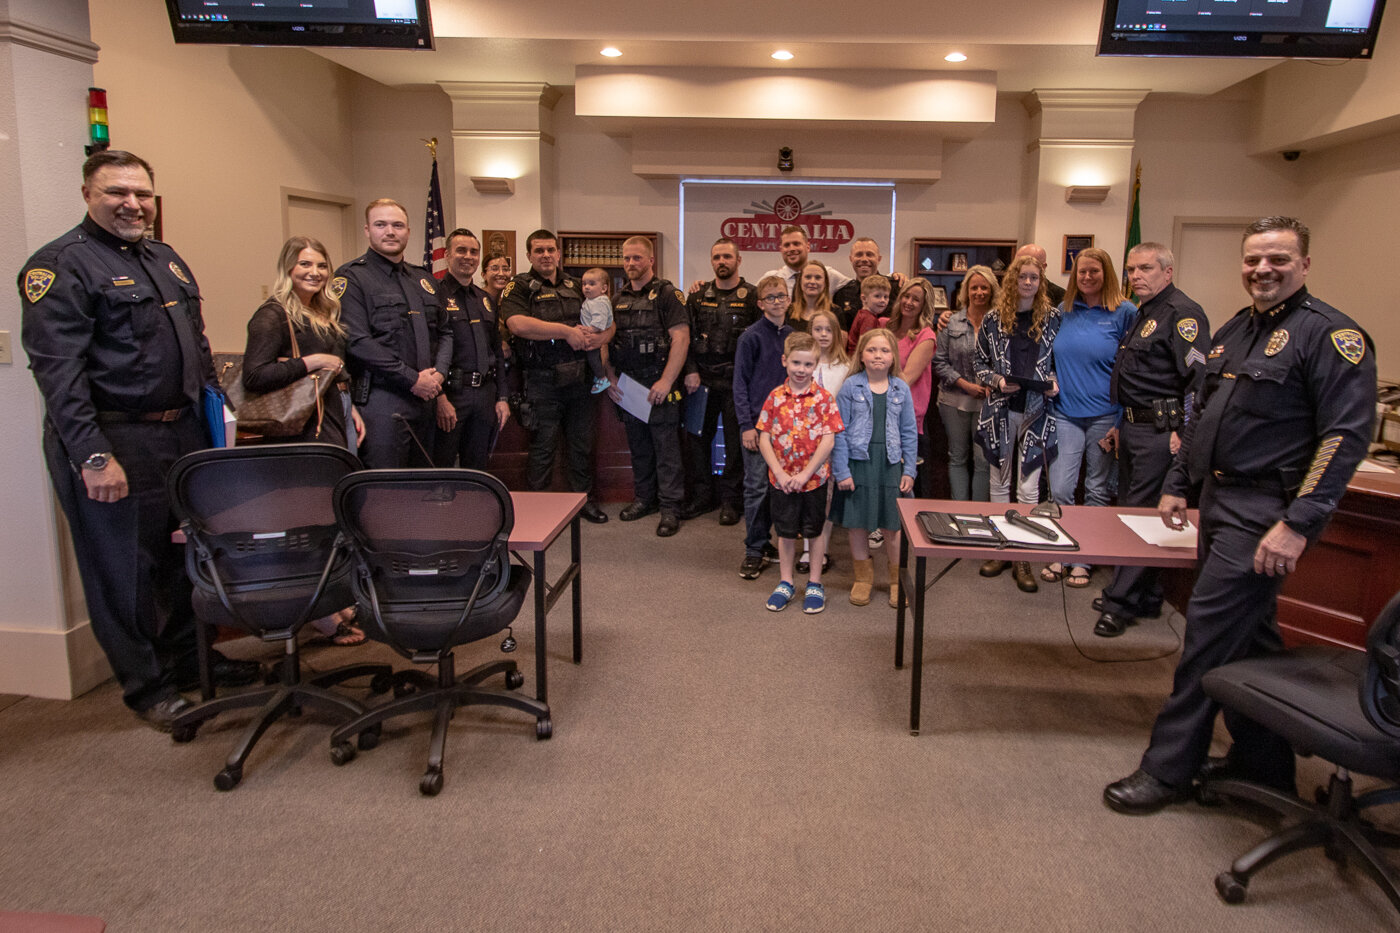 Members of the Centralia Police Department and their family members pose for a photo following the departments annual award ceremony Tuesday night at Centralia City Hall.